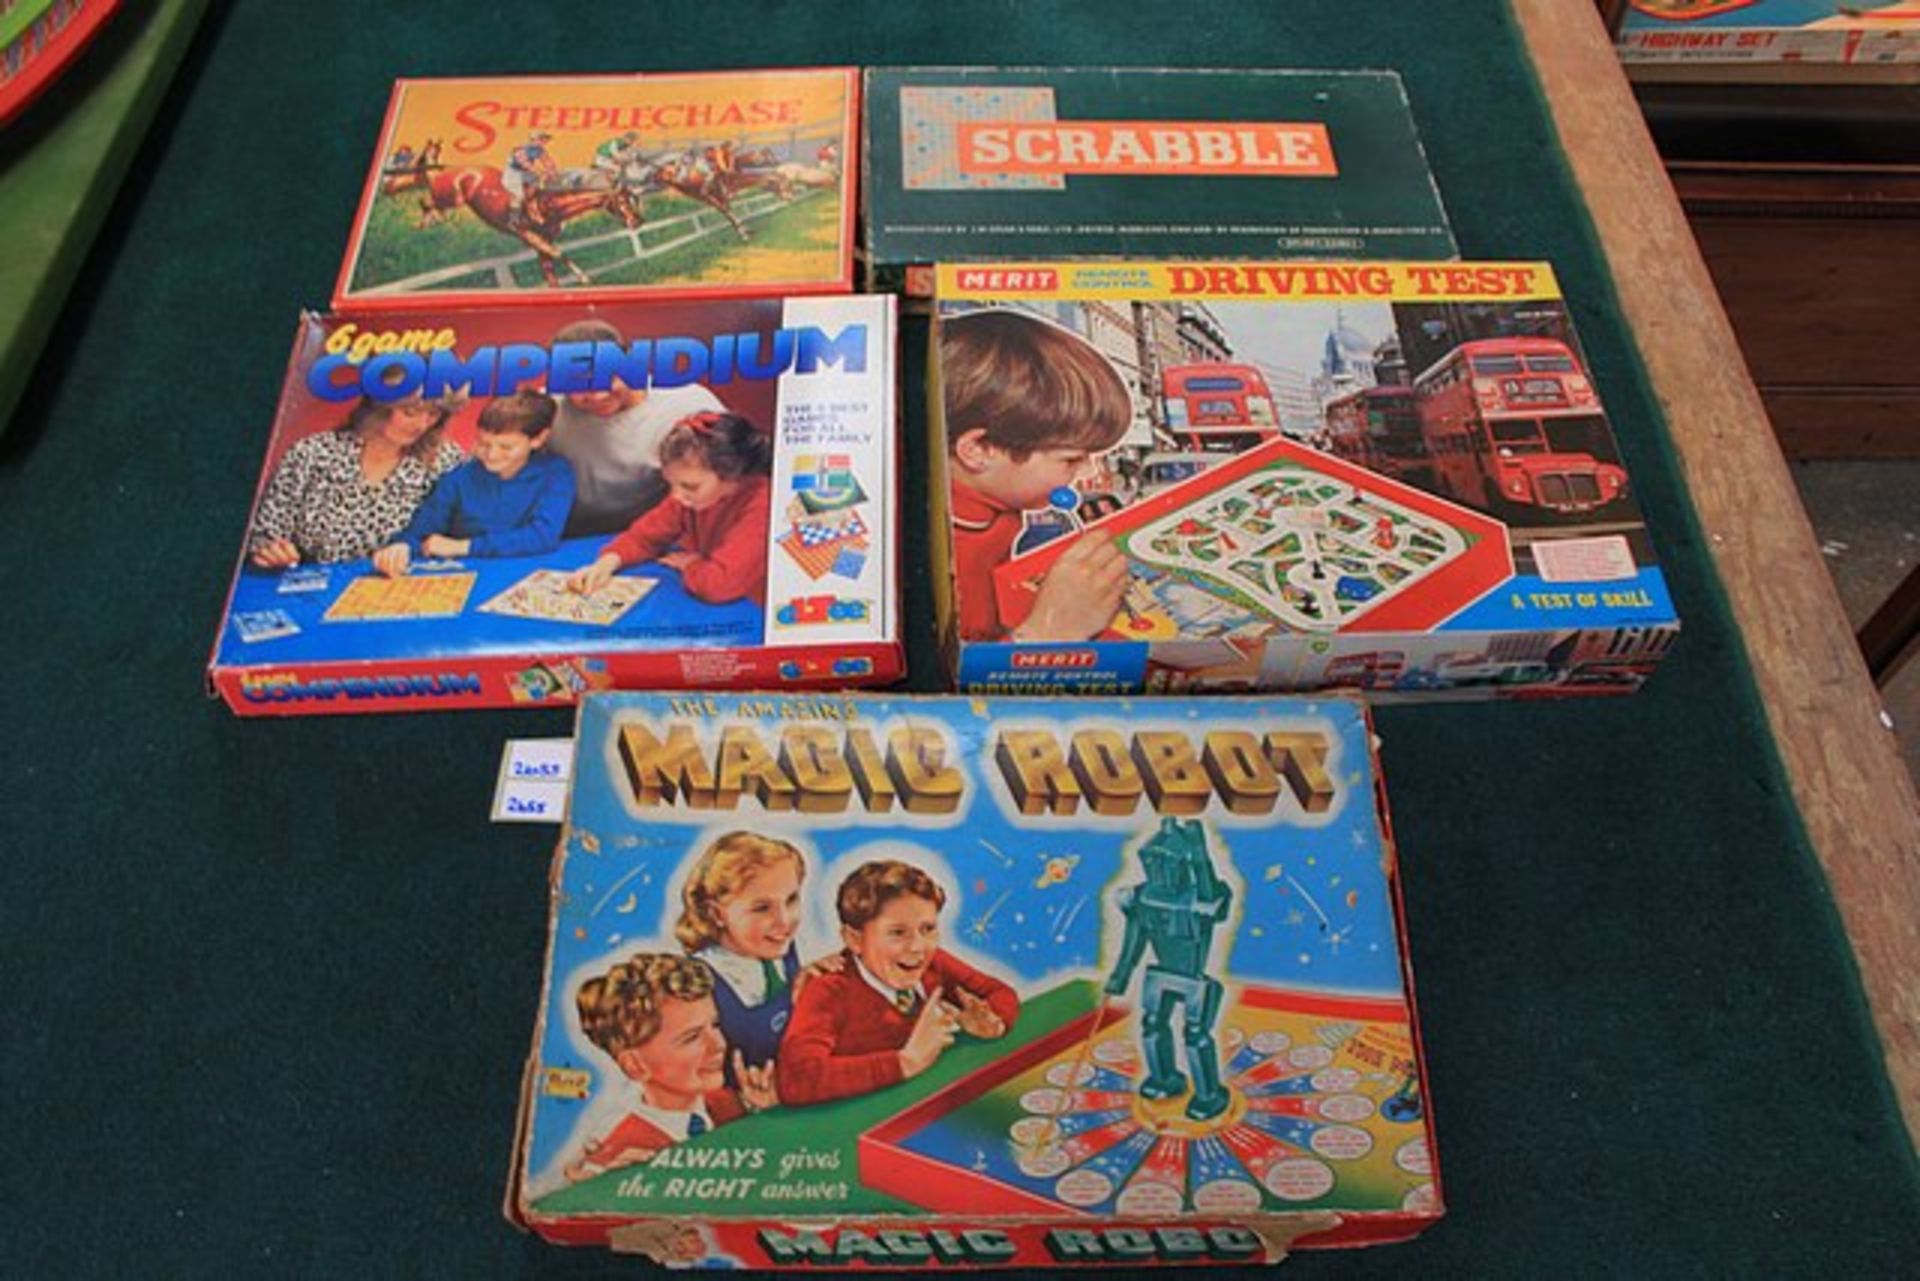 5x Boxed Board Games 6 Game Compendium, Magic Robot, Remote Control Driving Test, Scrabble And